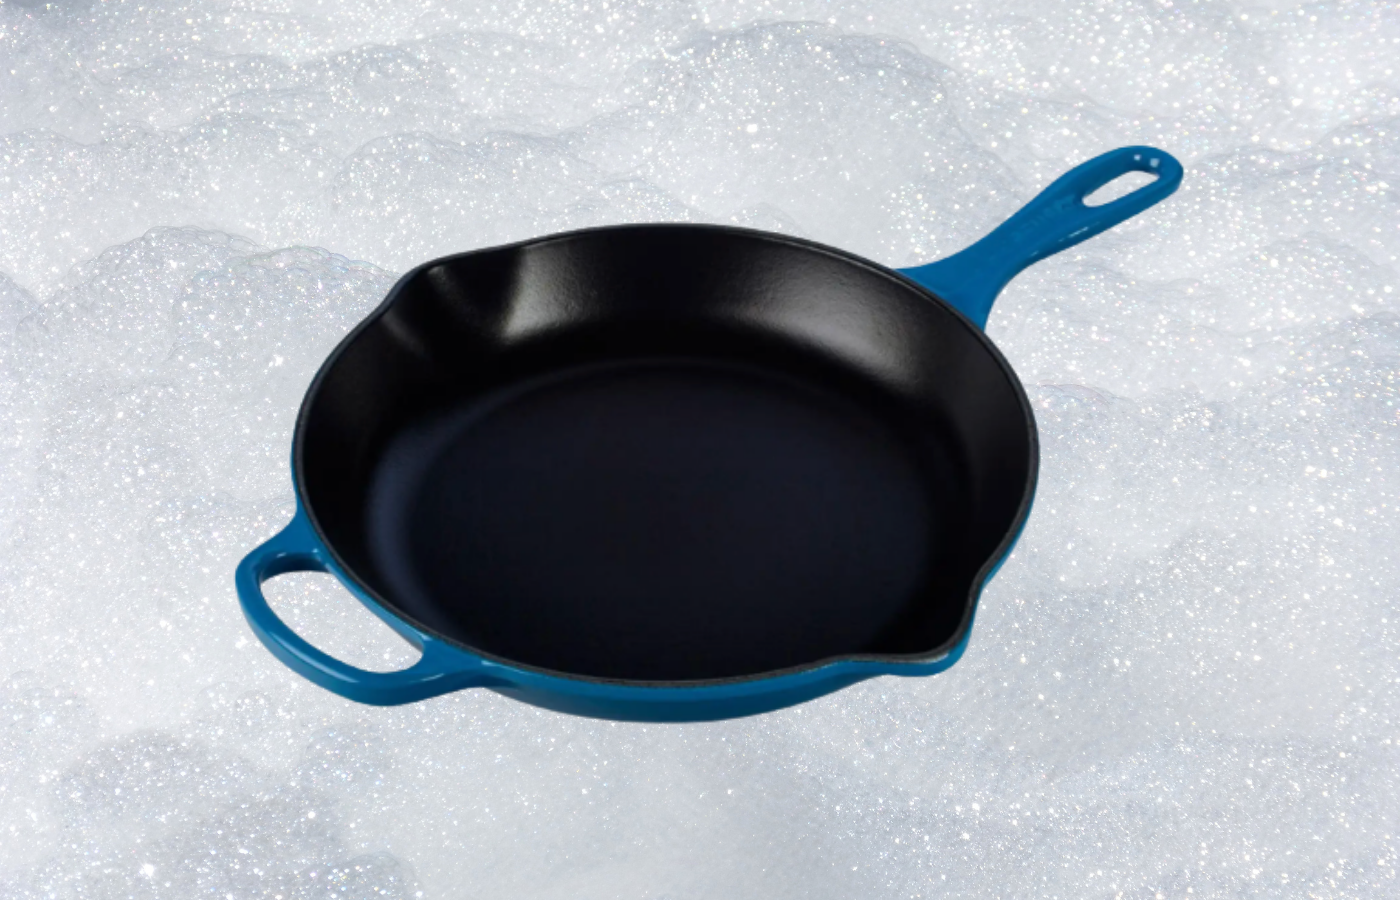 Hundreds of Nordstrom shoppers are eyeing this Le Creuset pan that’s 44 percent off